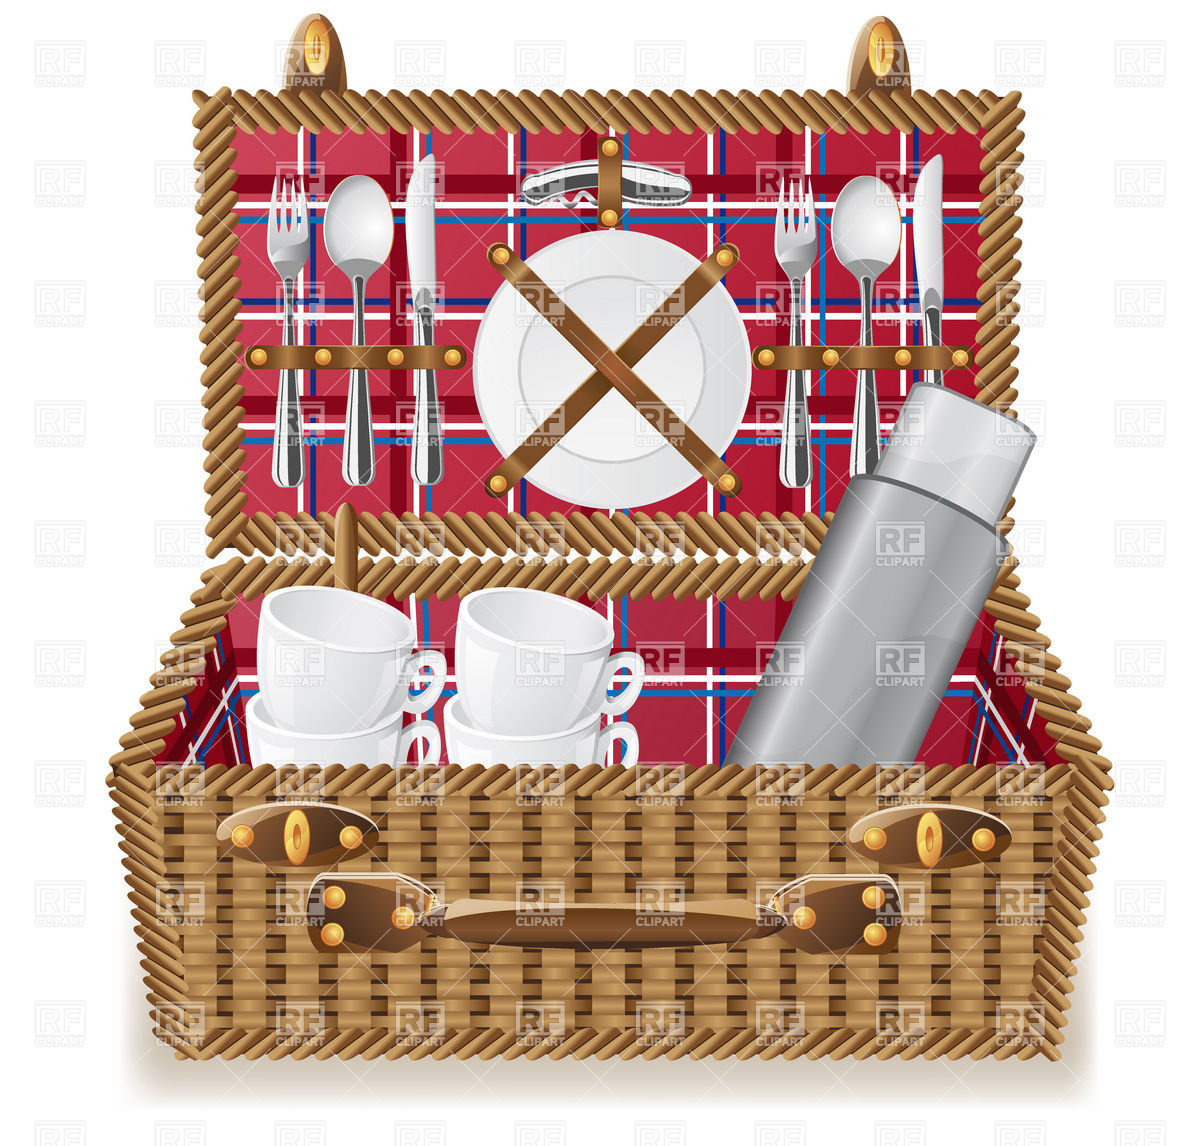 Picnic Basket With Tableware   Open Wicker Suitcase Objects Download    